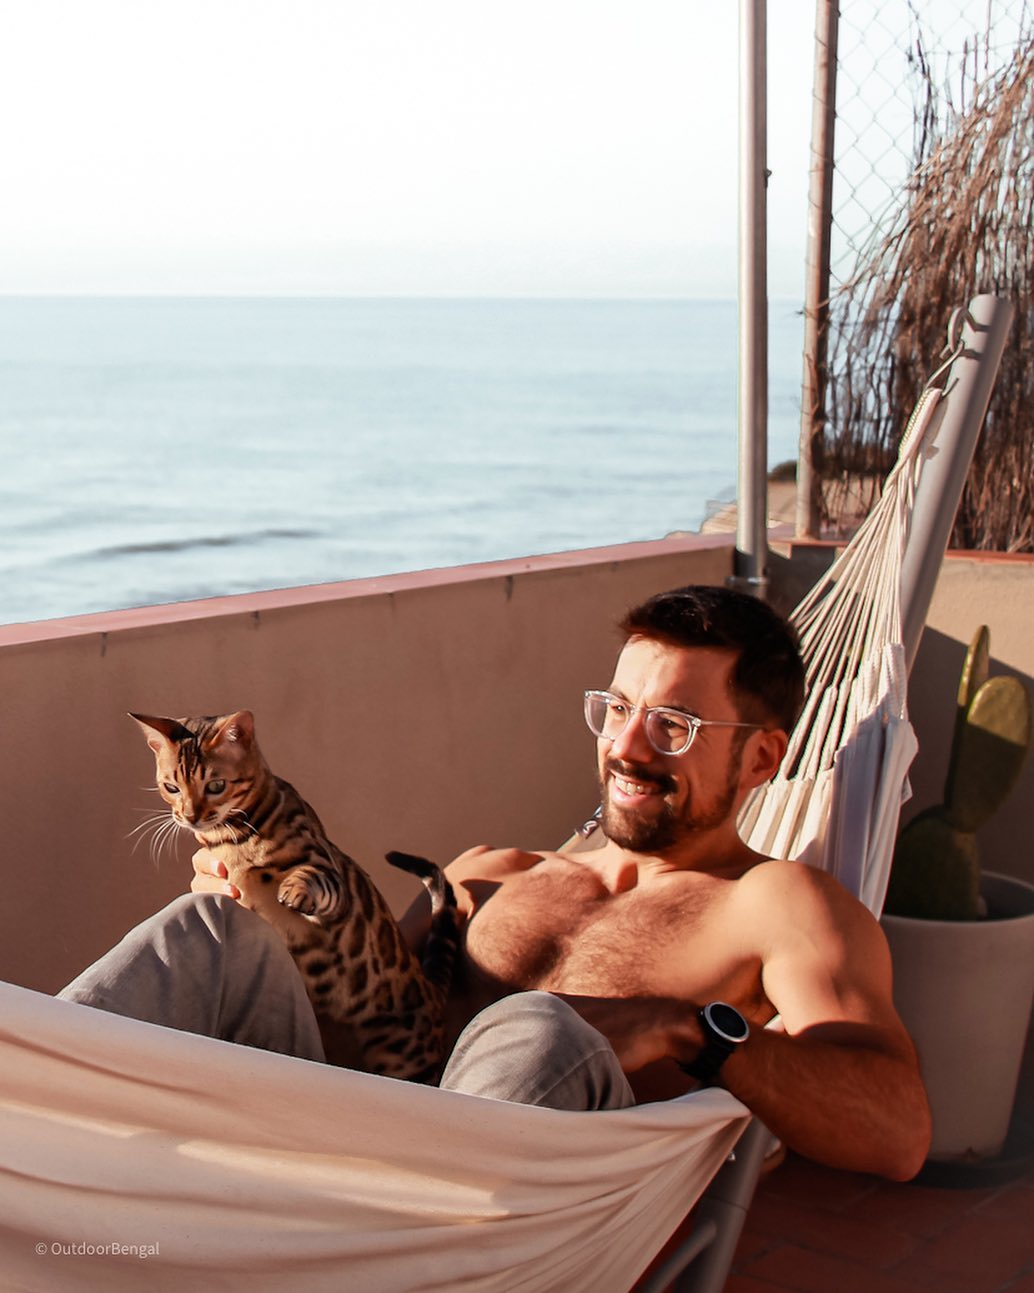 Albert Colominas wants to “(help) cat parents do more and better with their cats”.